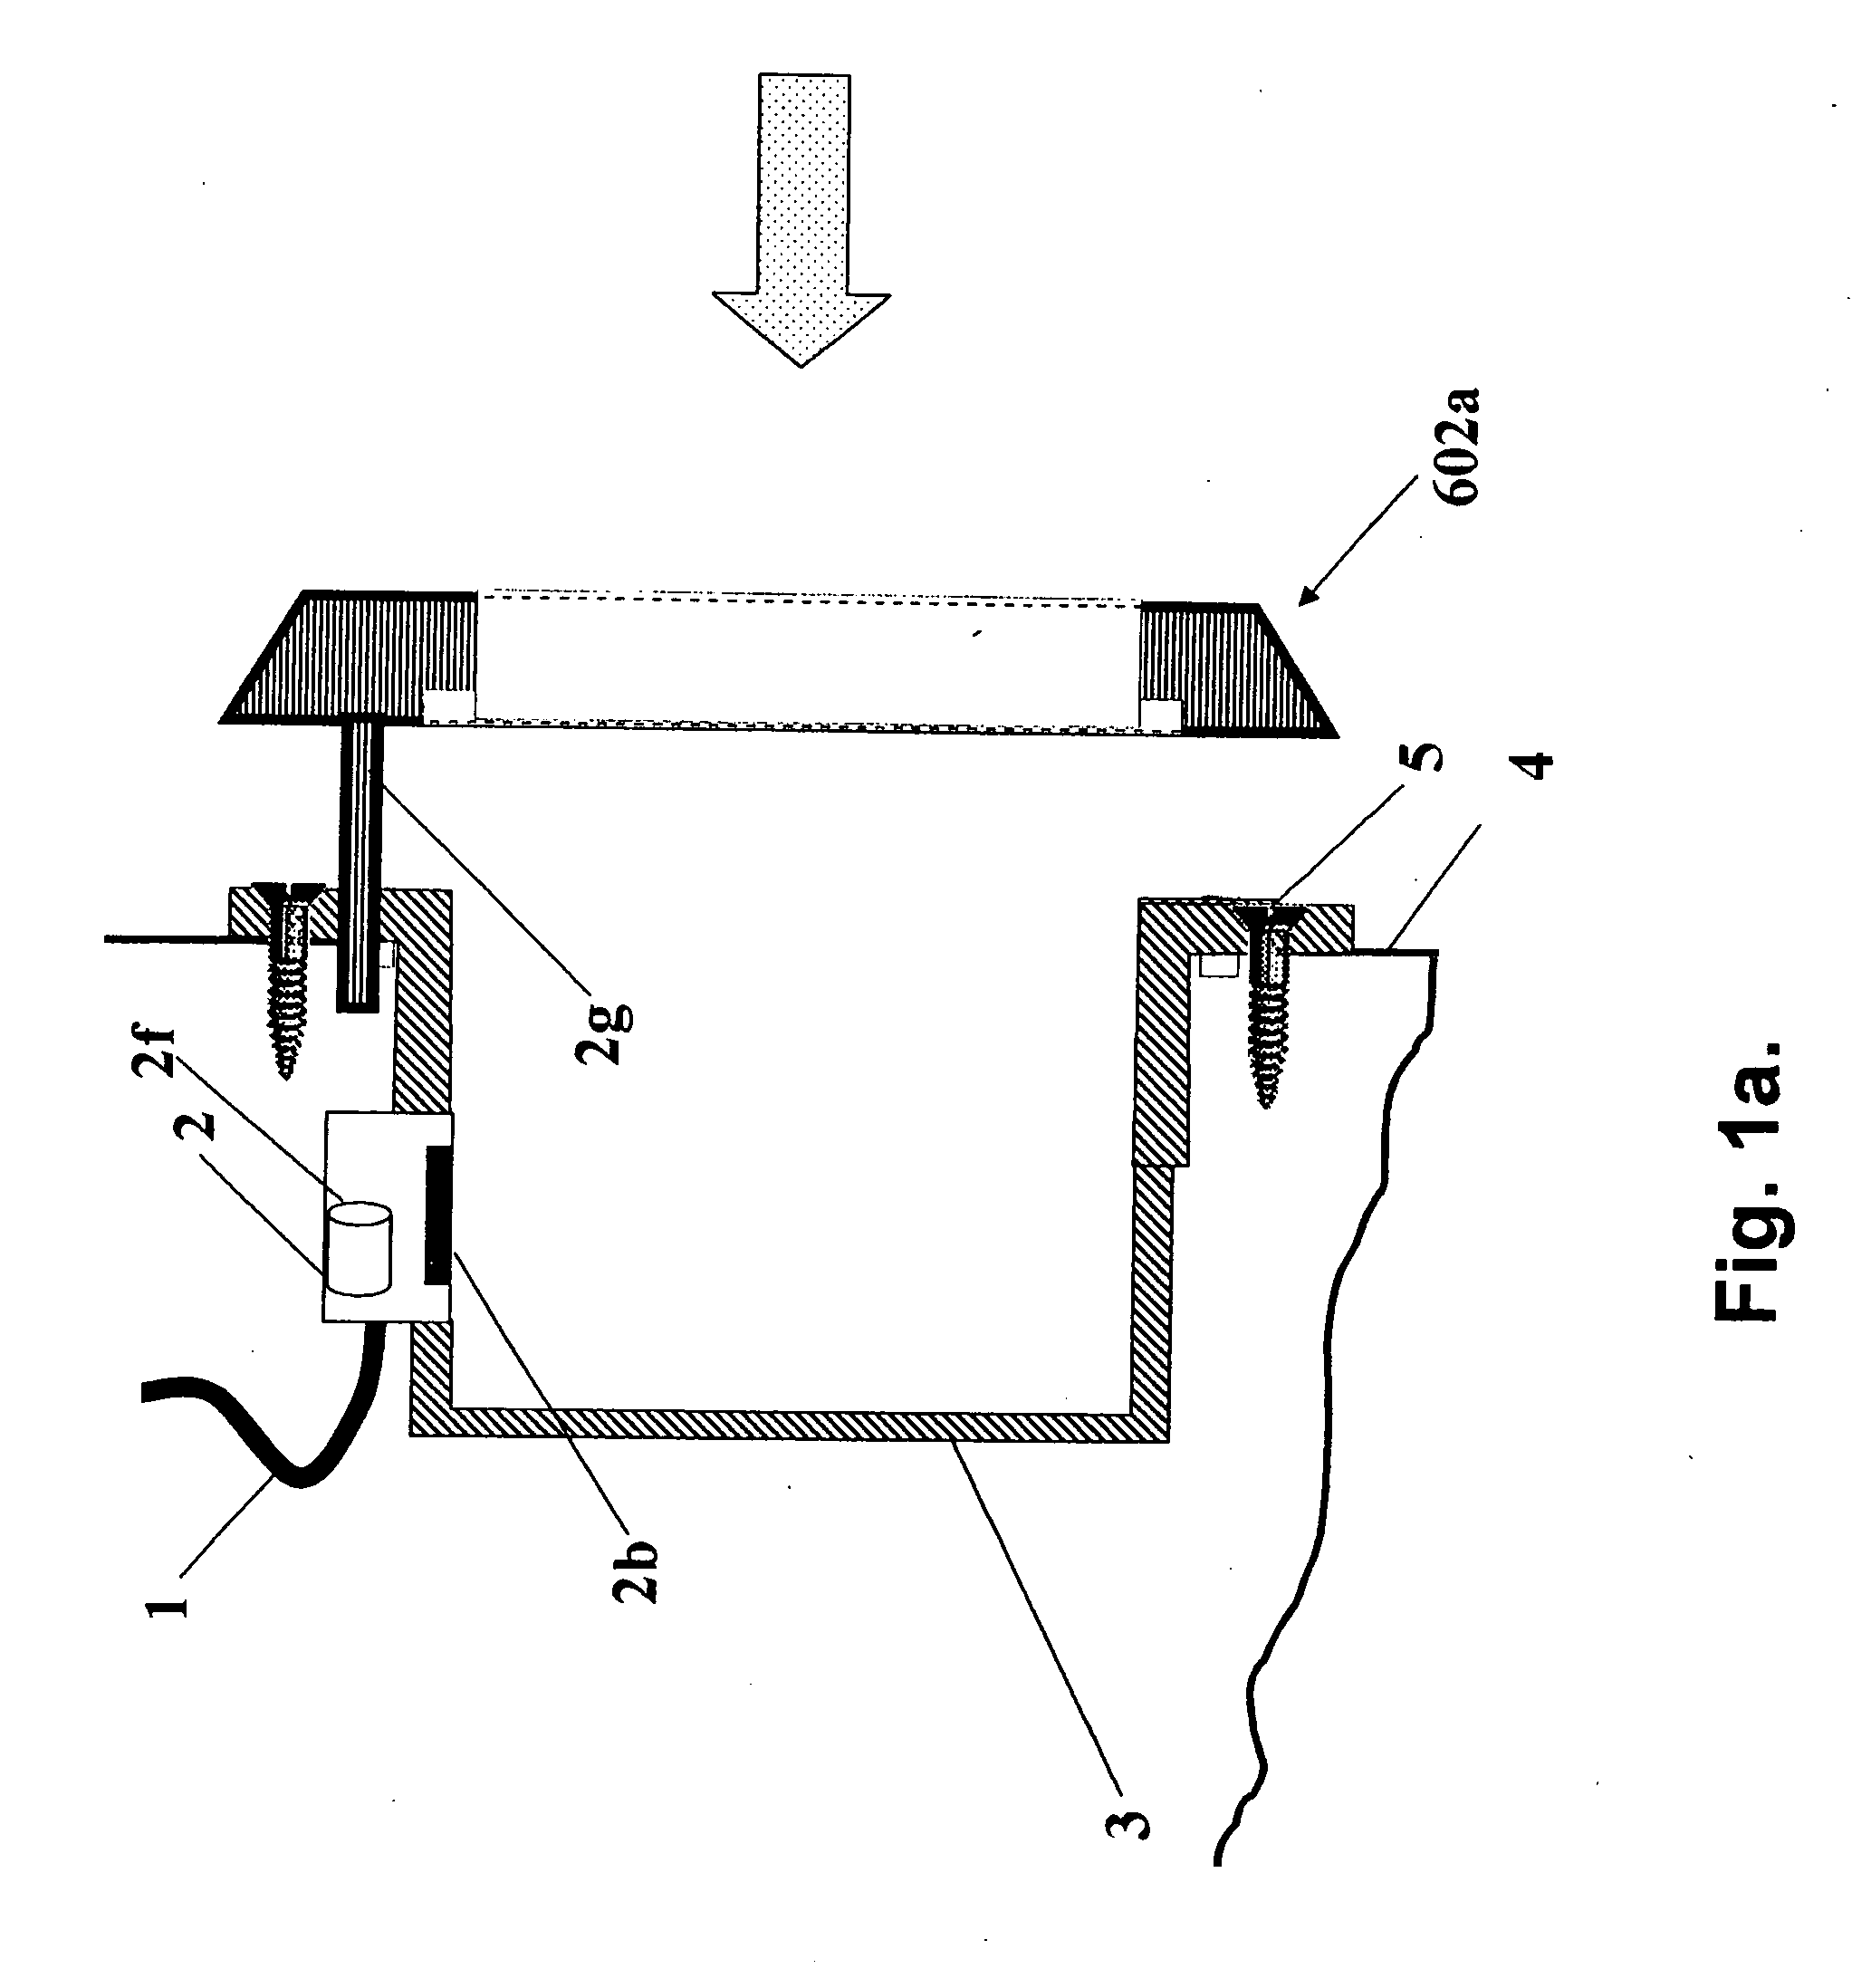 Wall mounted system with insertable computing apparatus